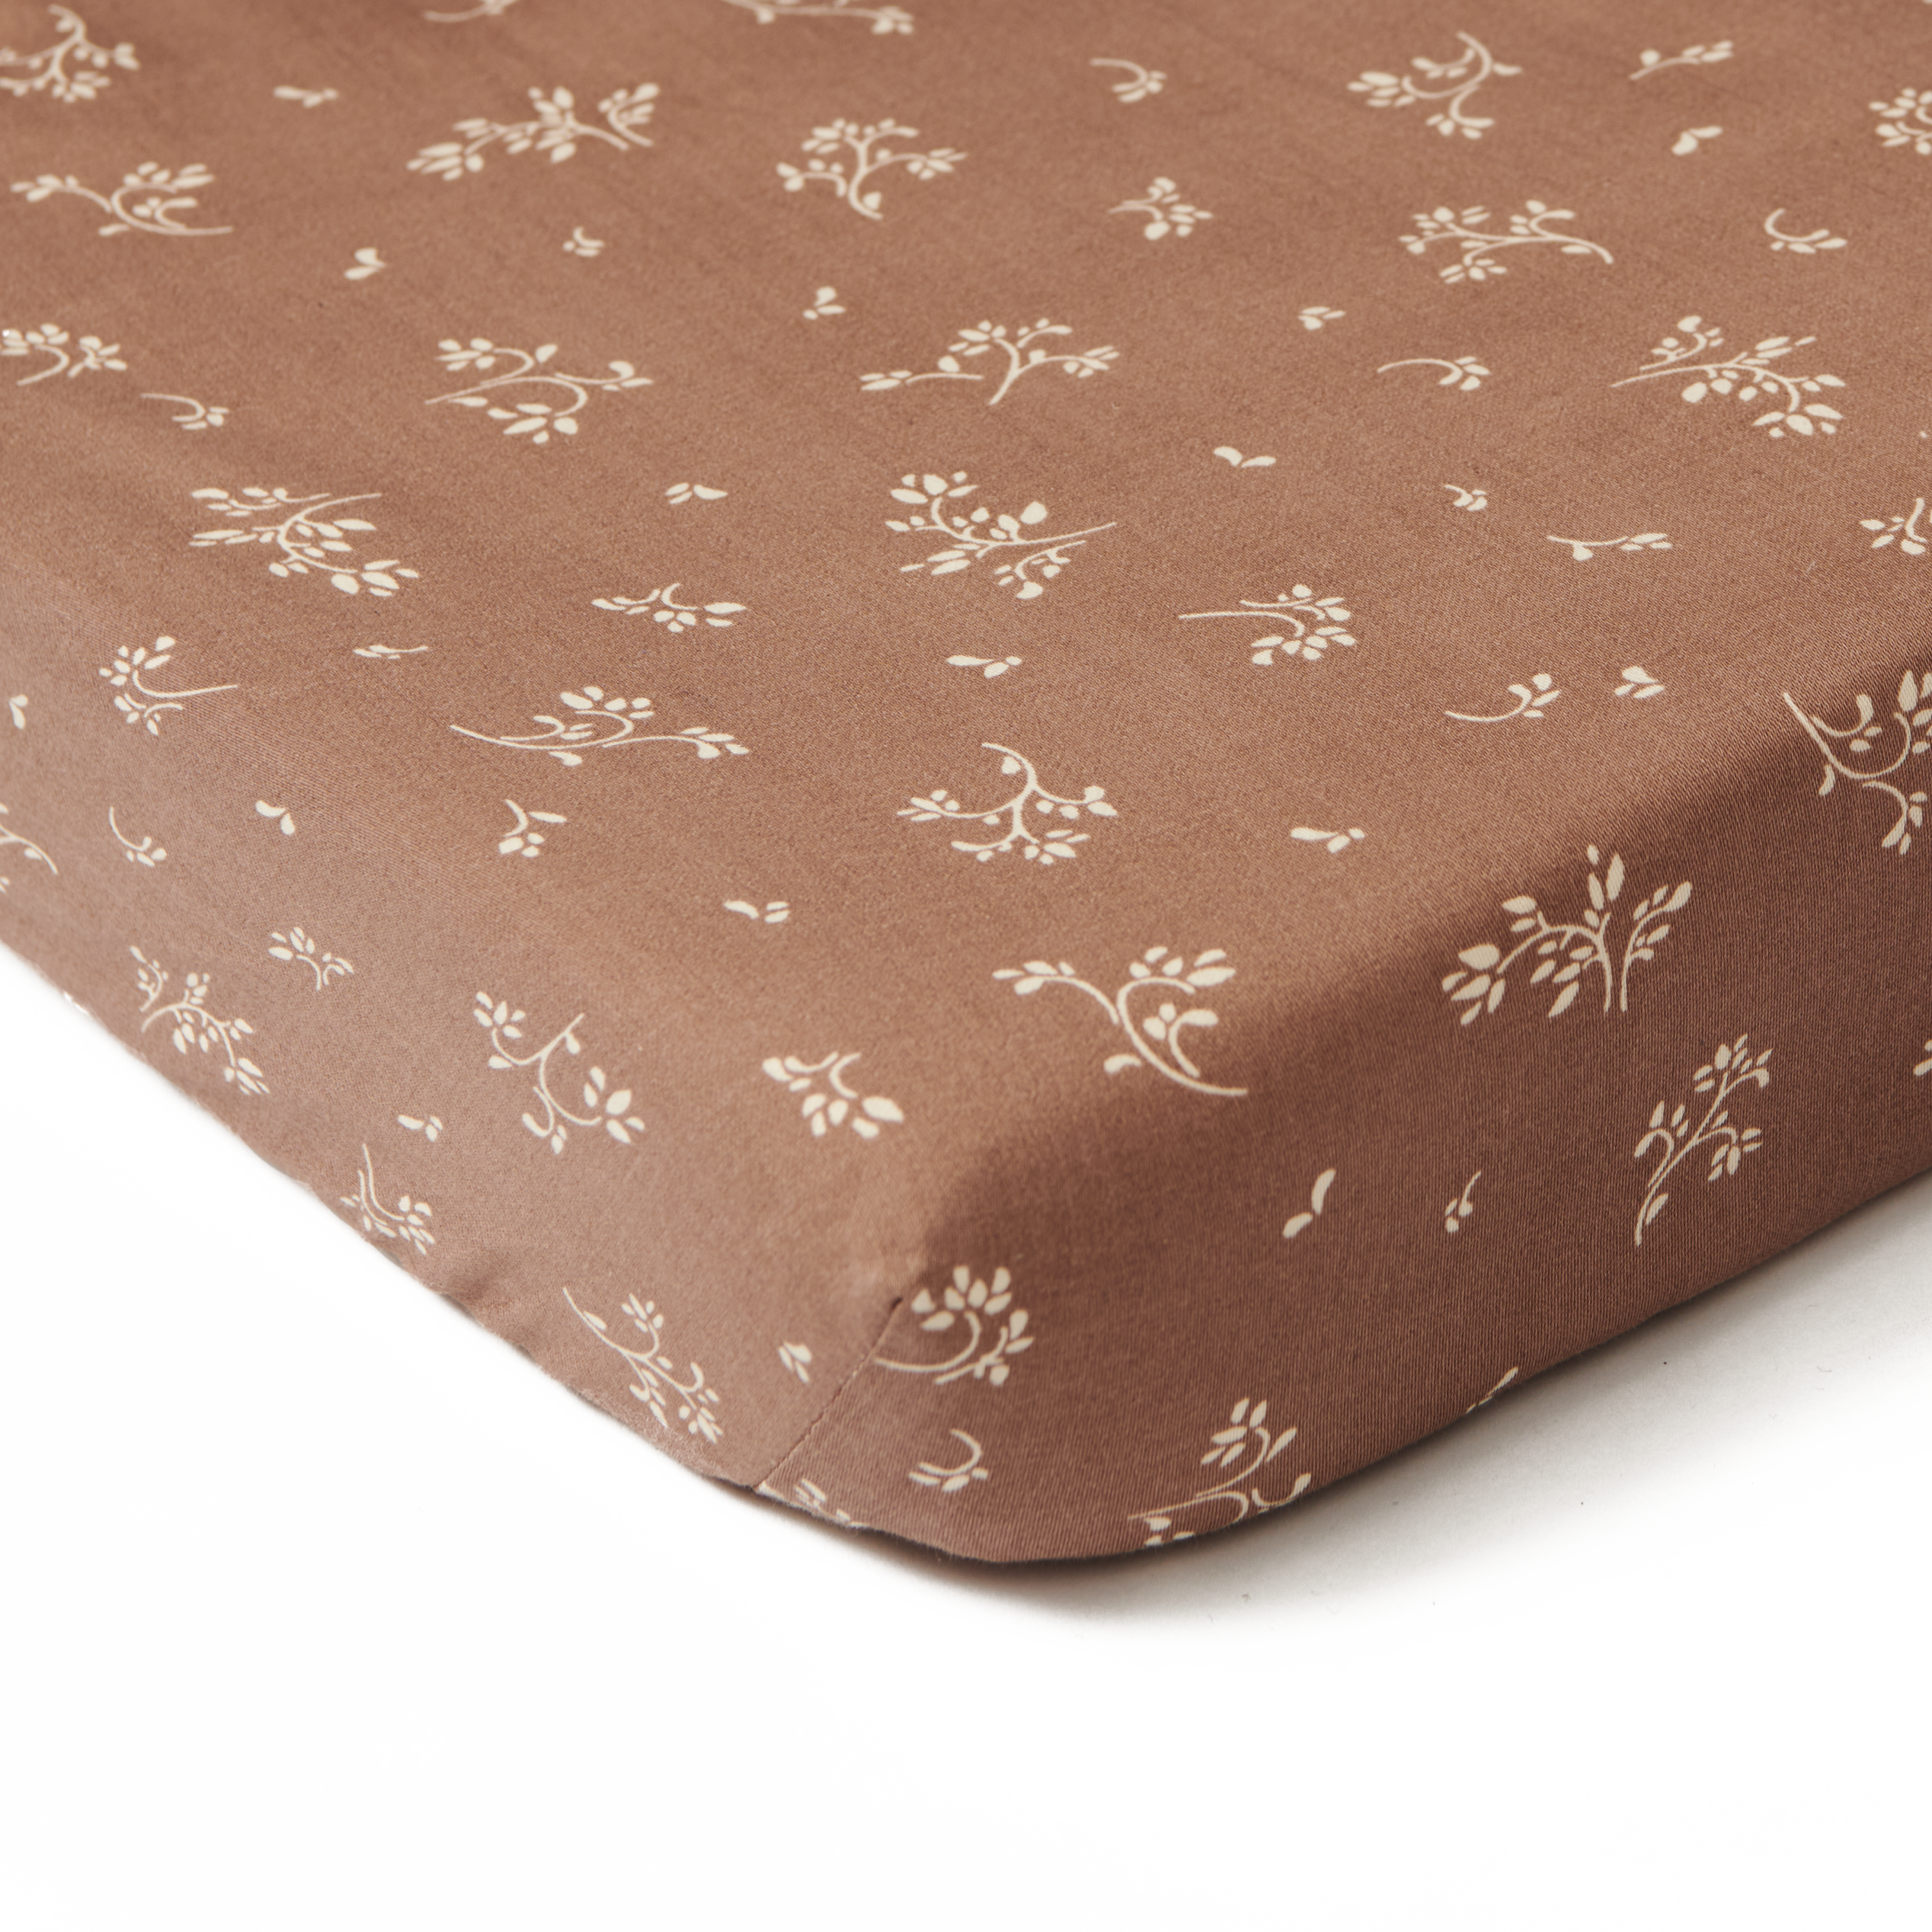 That's Mine Cot & Cot bed sheet - Secret garden Cocoa  - Hola BB